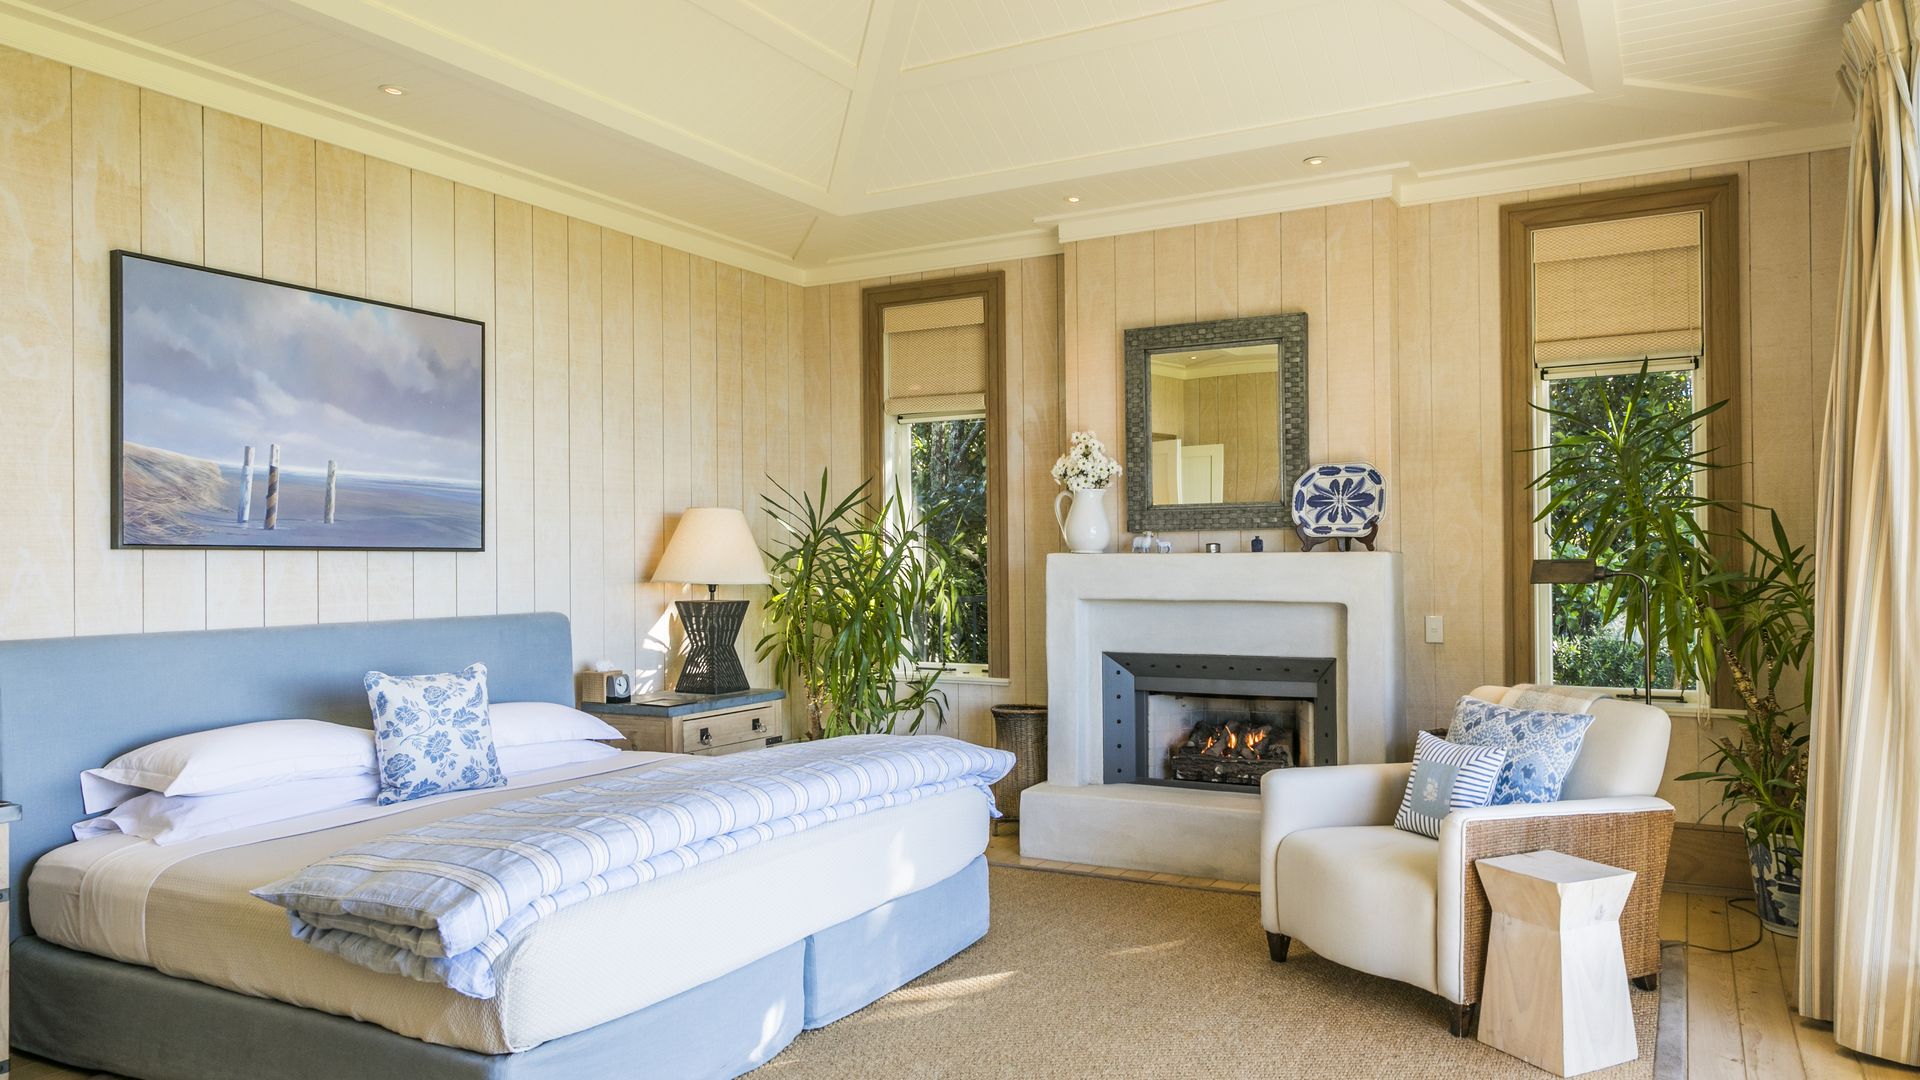 Image displaying a fireplace inside the Owner's Cottage bedroom at Kauri Cliffs Golf Resort